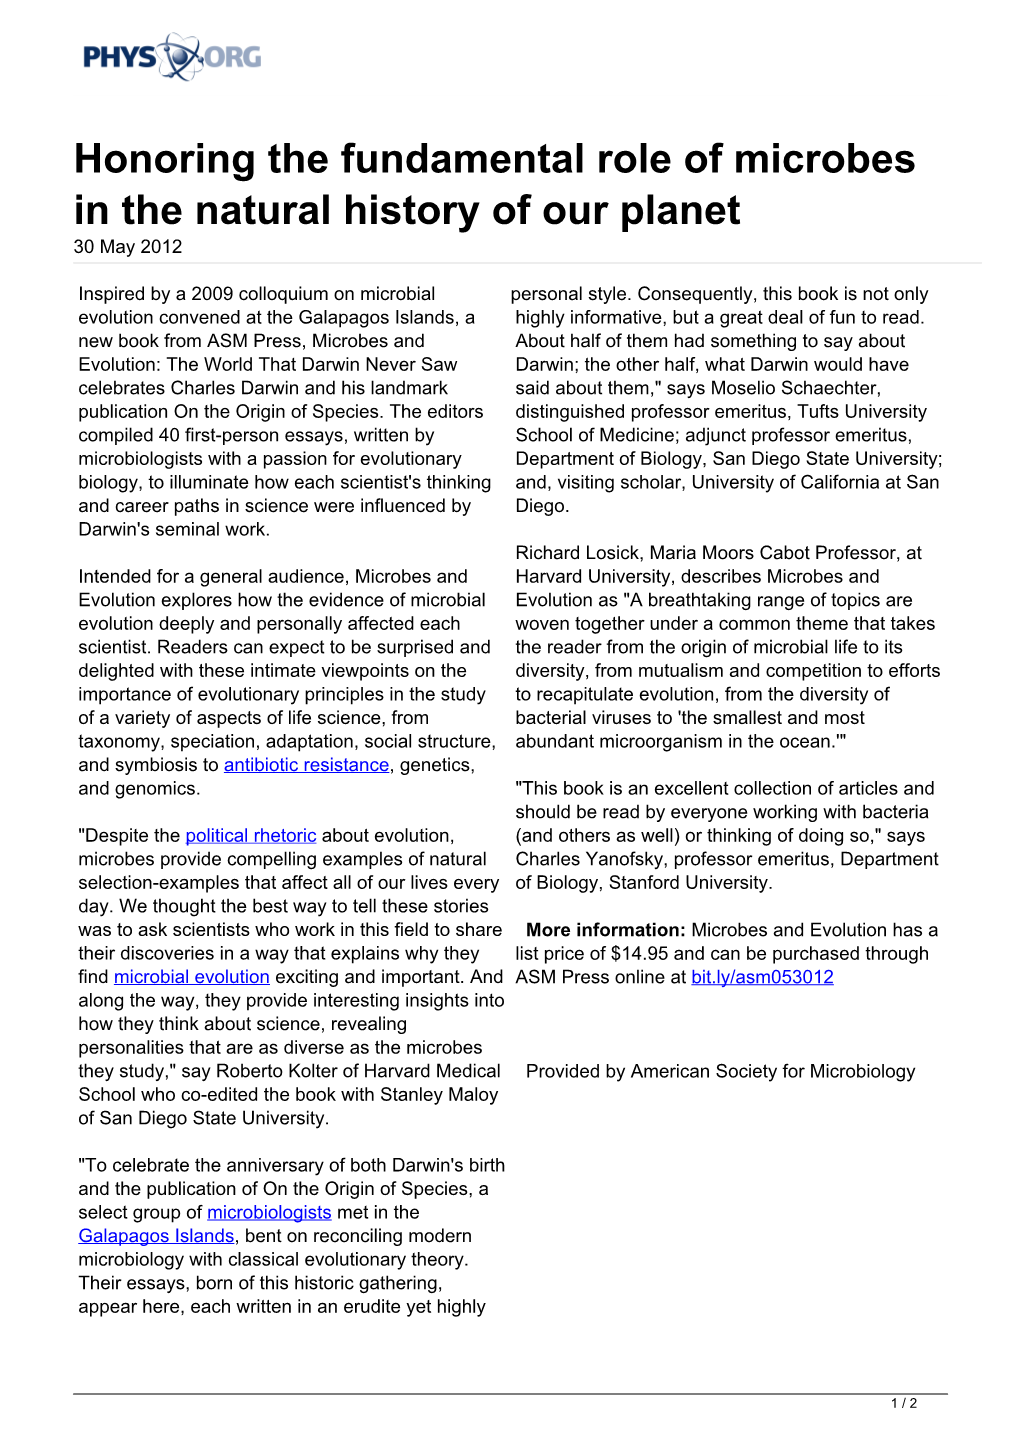 Honoring the Fundamental Role of Microbes in the Natural History of Our Planet 30 May 2012